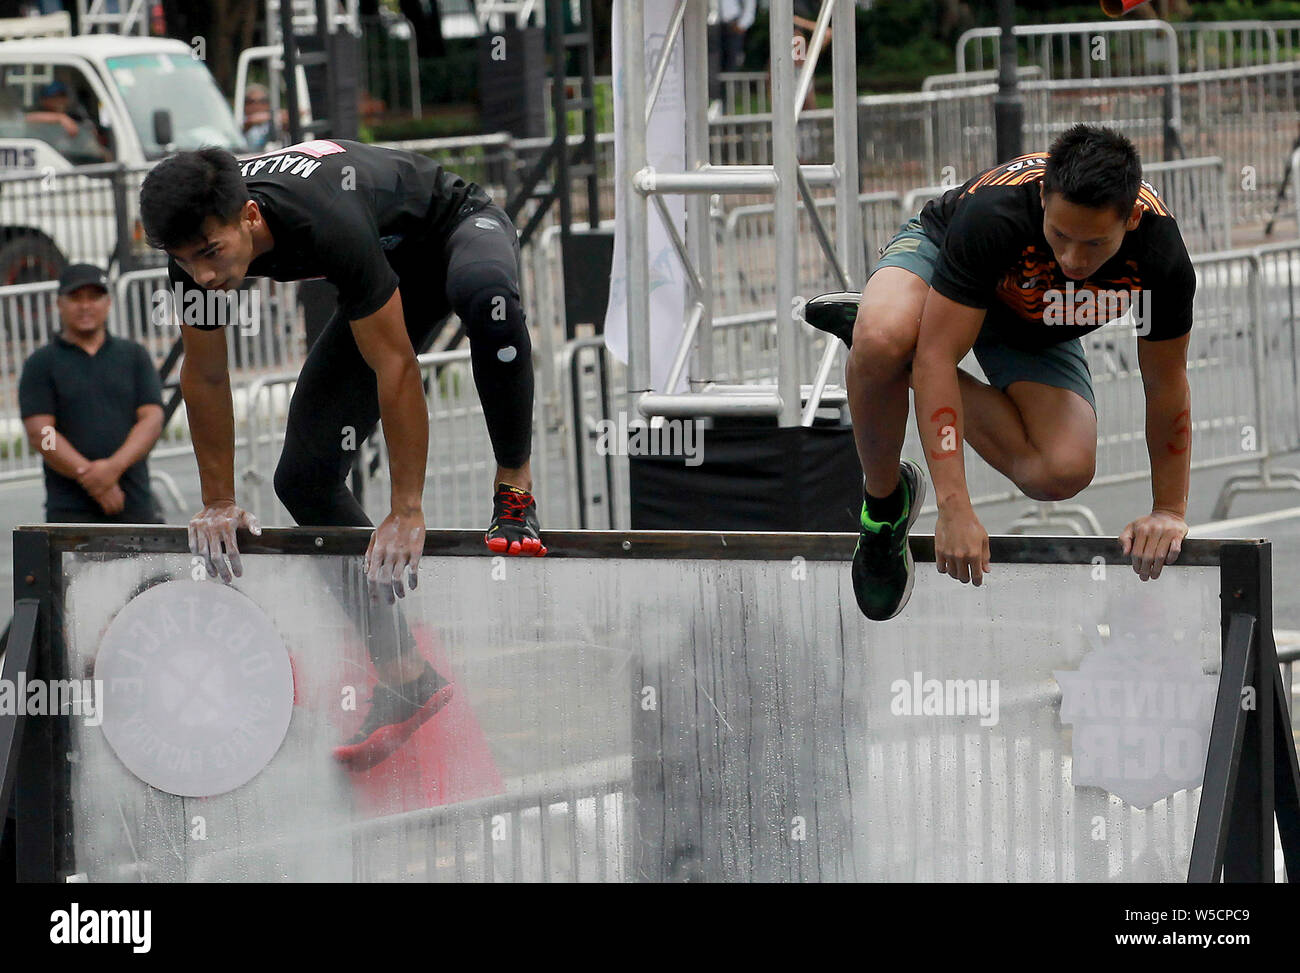 Manila, Philippines. 28th July, 2019. Contestants participate in the 2019 Asia Obstacle Course Race (OCR) Games in Manila, the Philippines, July 28, 2019. Credit: Rouelle Umali/Xinhua/Alamy Live News Stock Photo